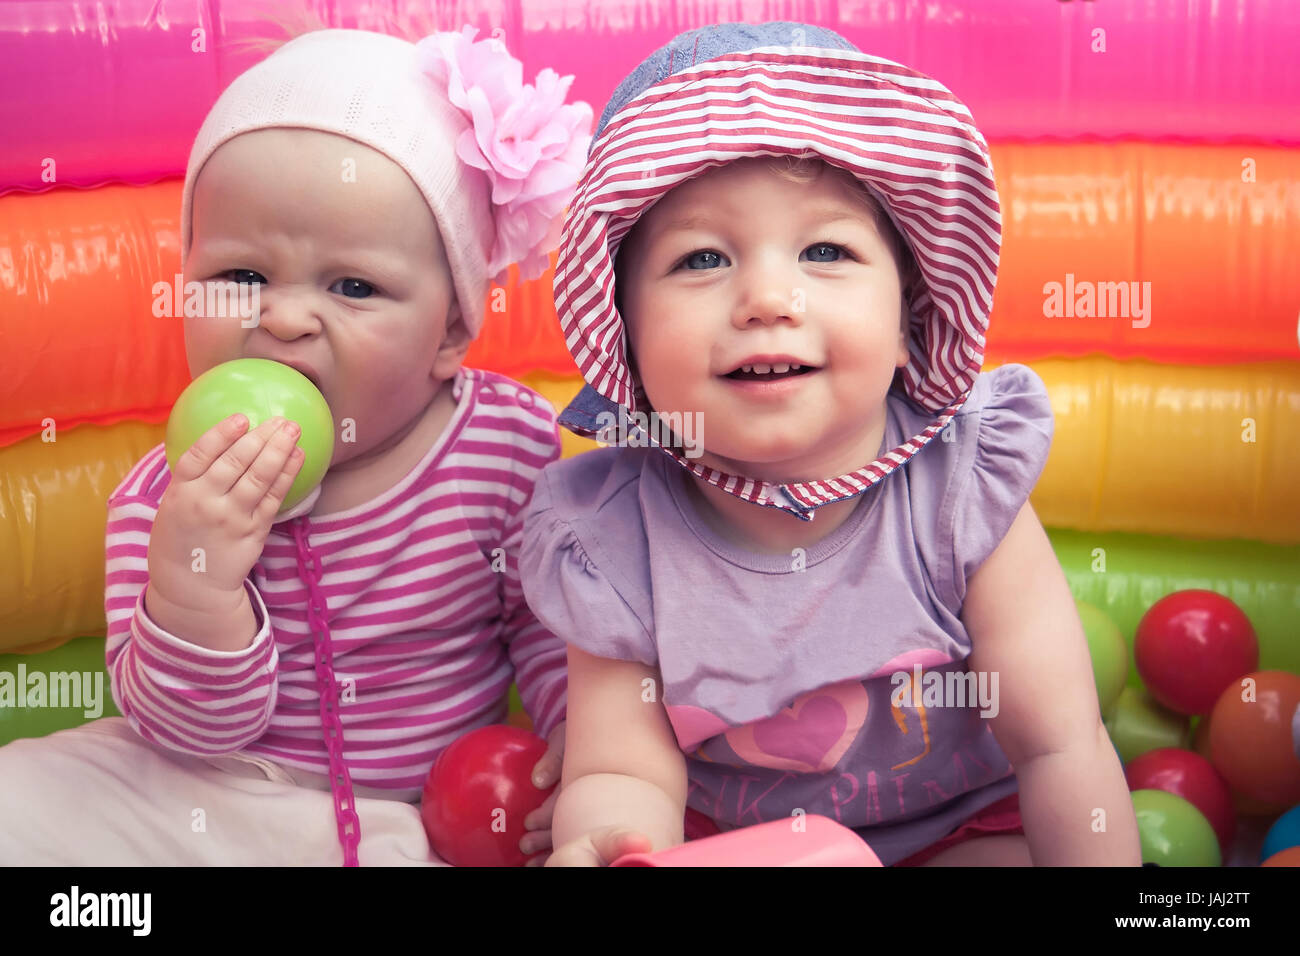 Two smiling cheerful cute baby girls playing together in entertainment park with toys symbolizing children friendship and happy childhood Stock Photo